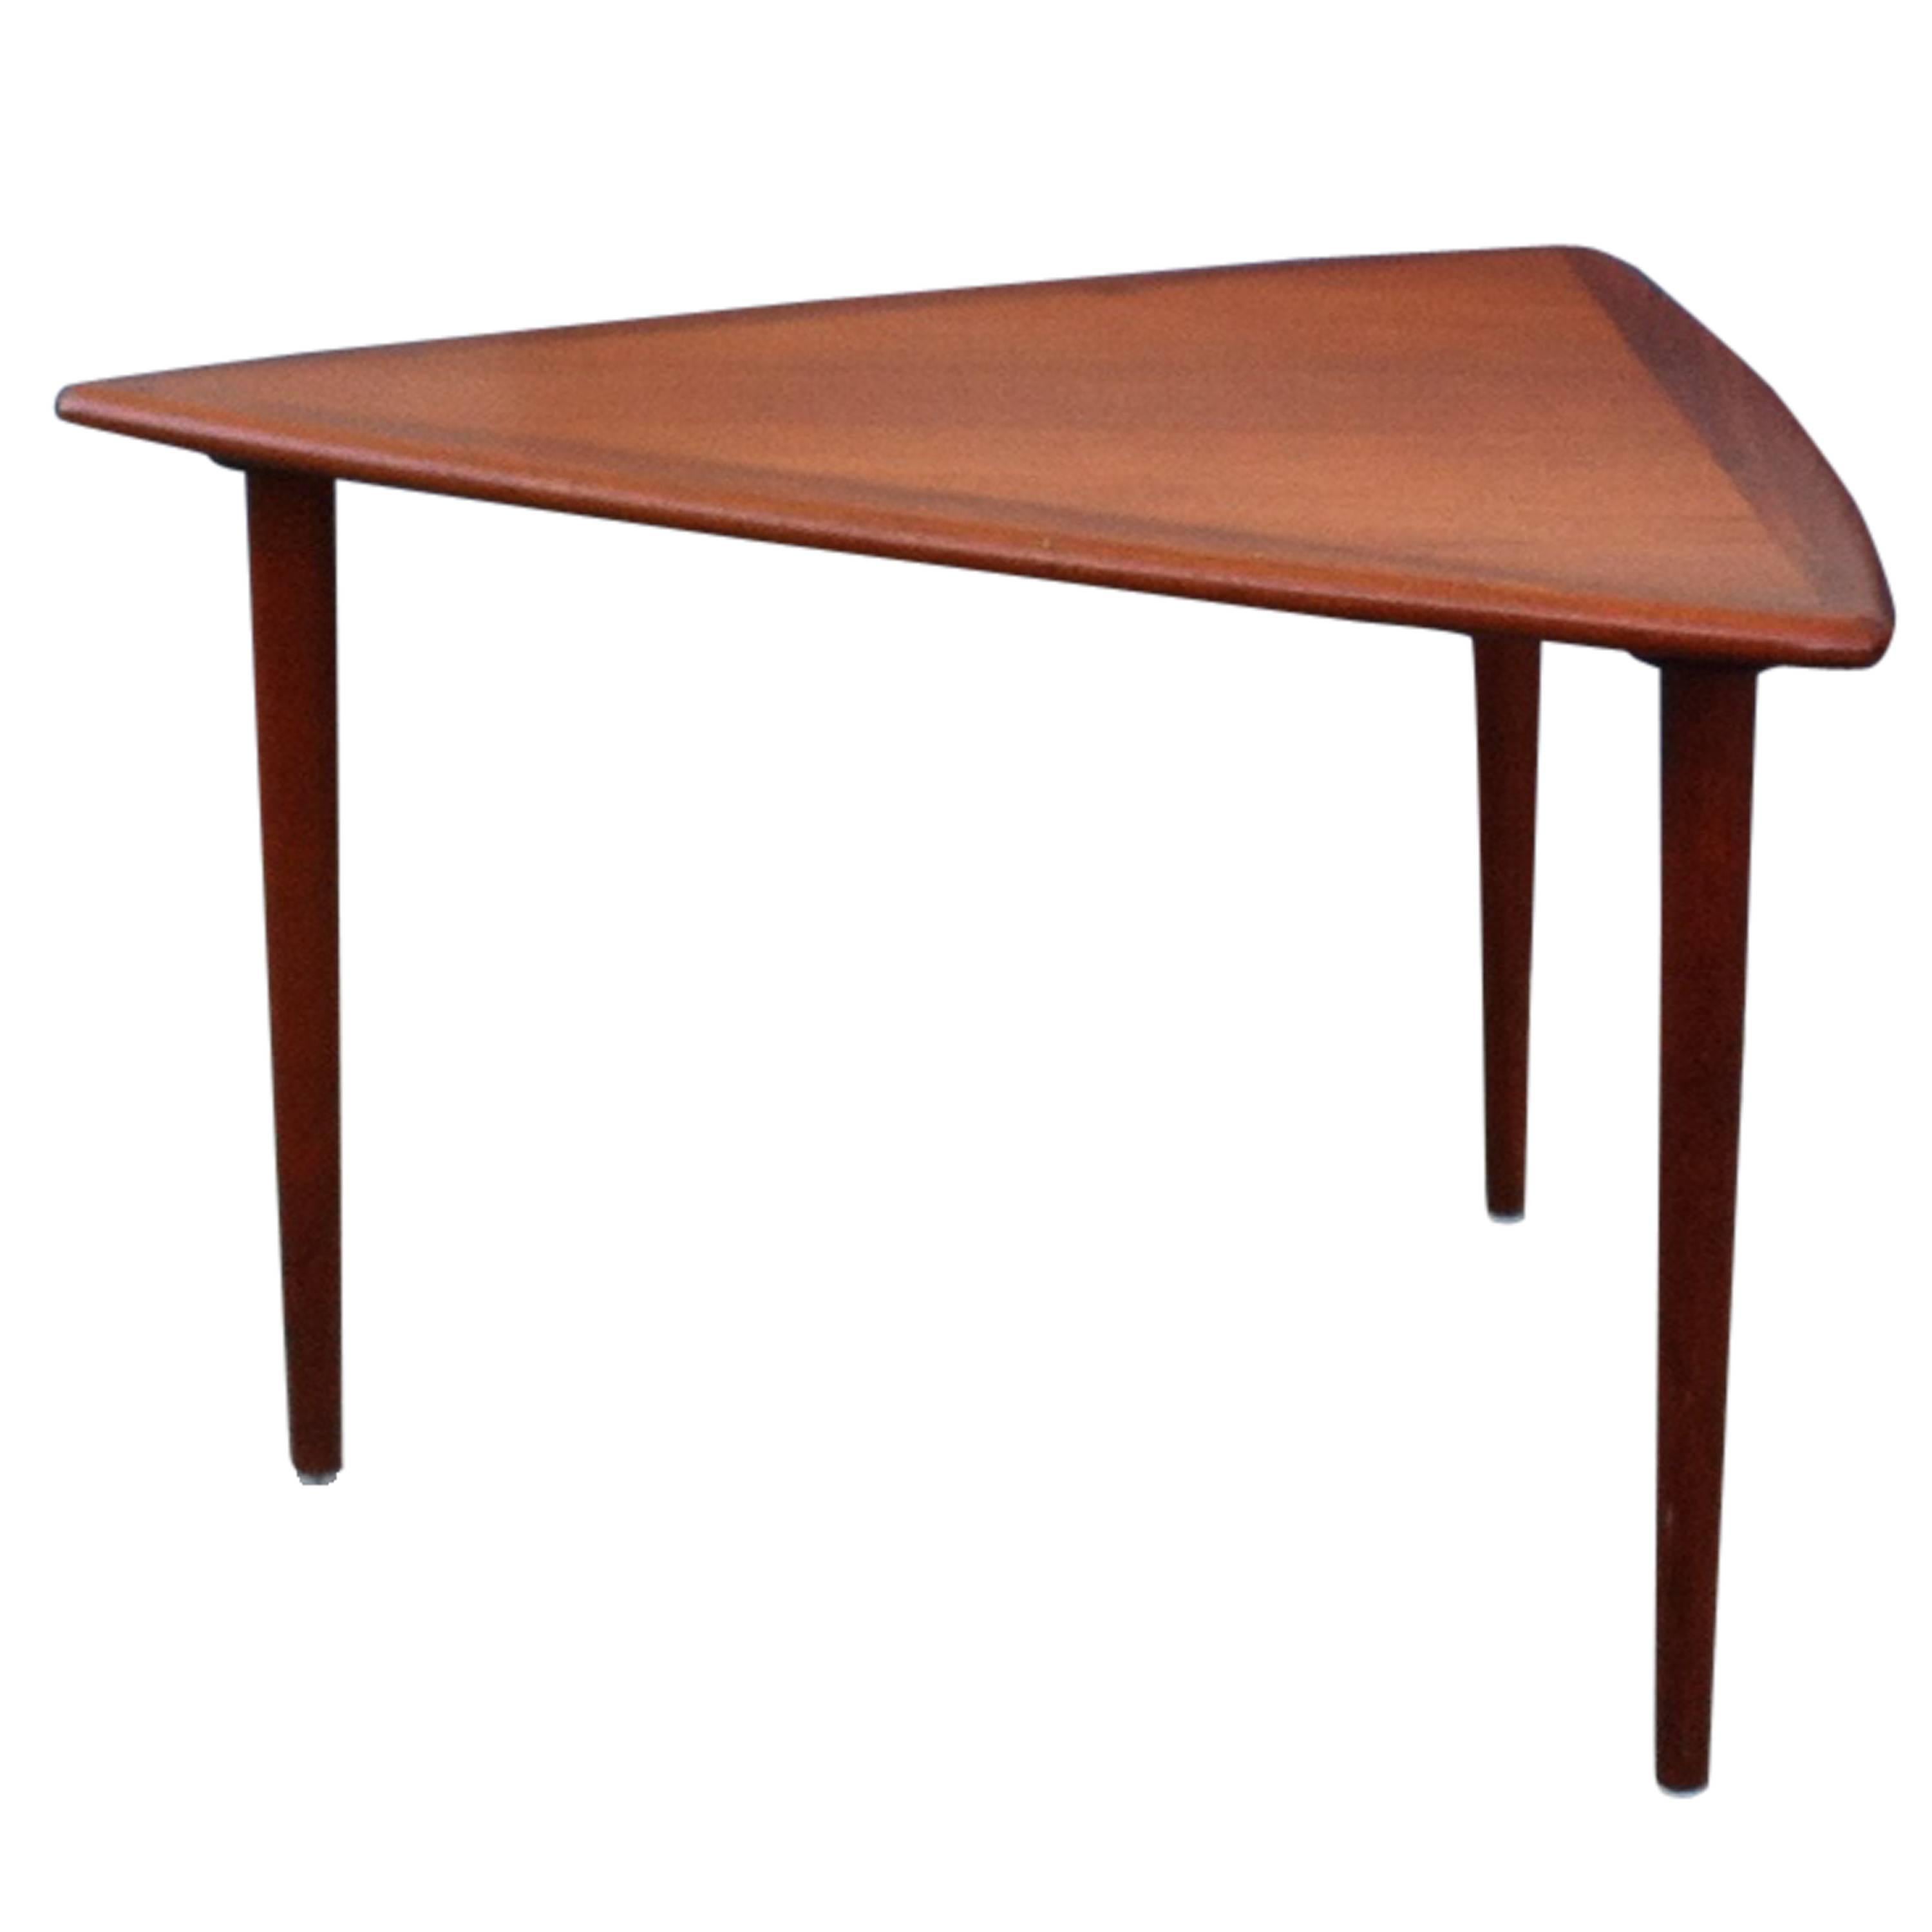 Triangular Shaped Danish Modern 1960s Coffee Table with Rounded Profiles